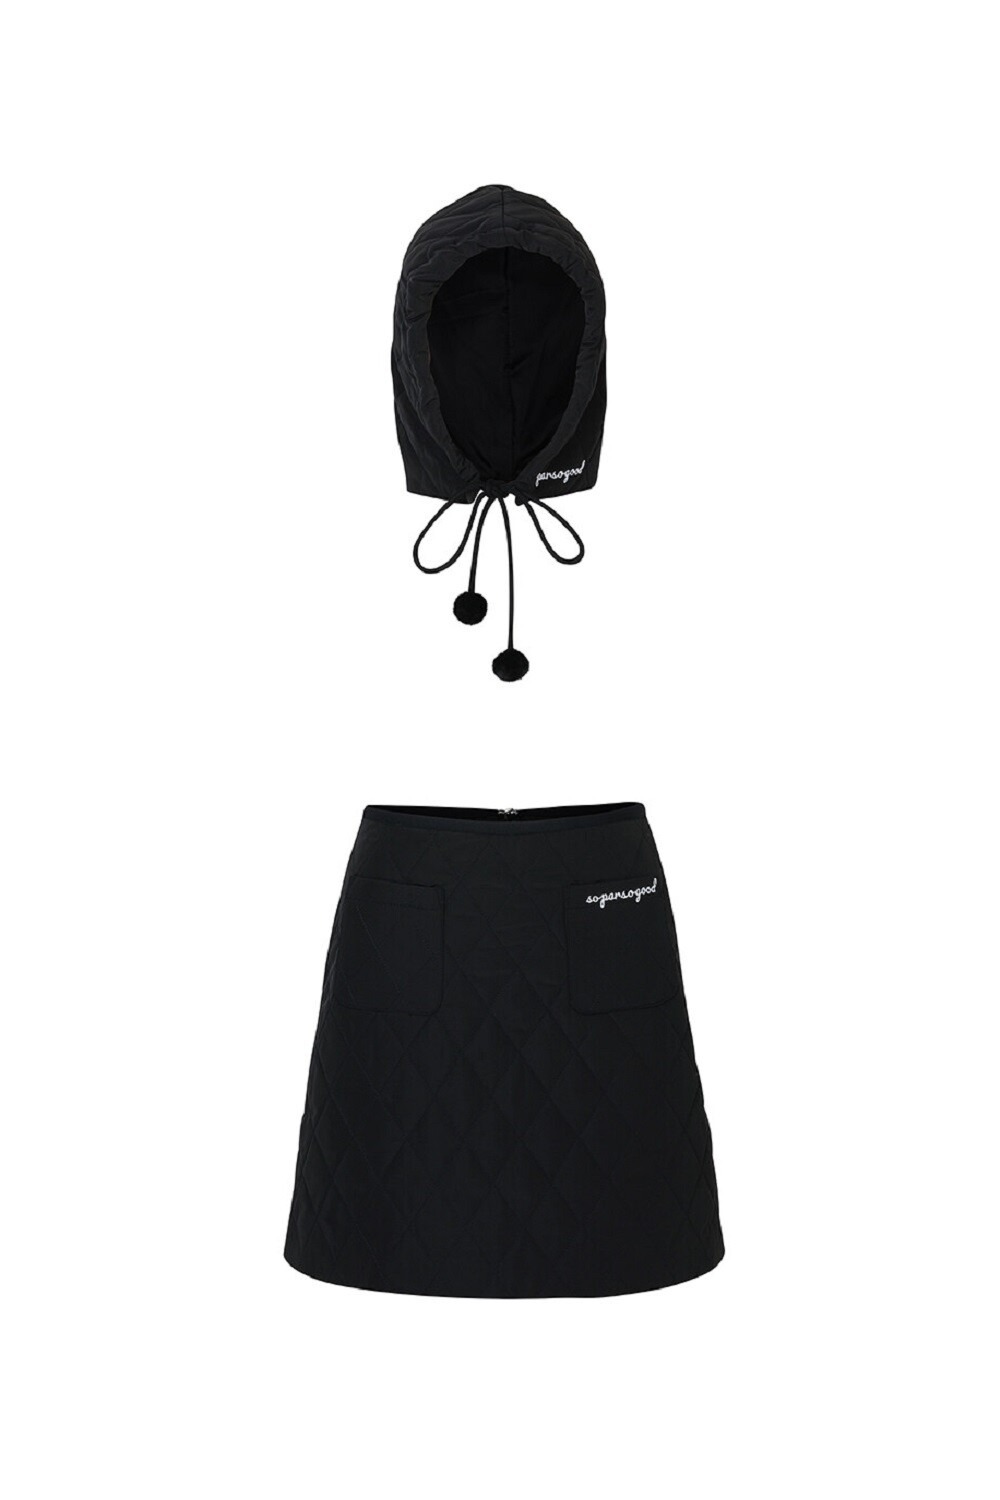 3M THINSULATE QUILTED BALACLAVA + SKIRT SET